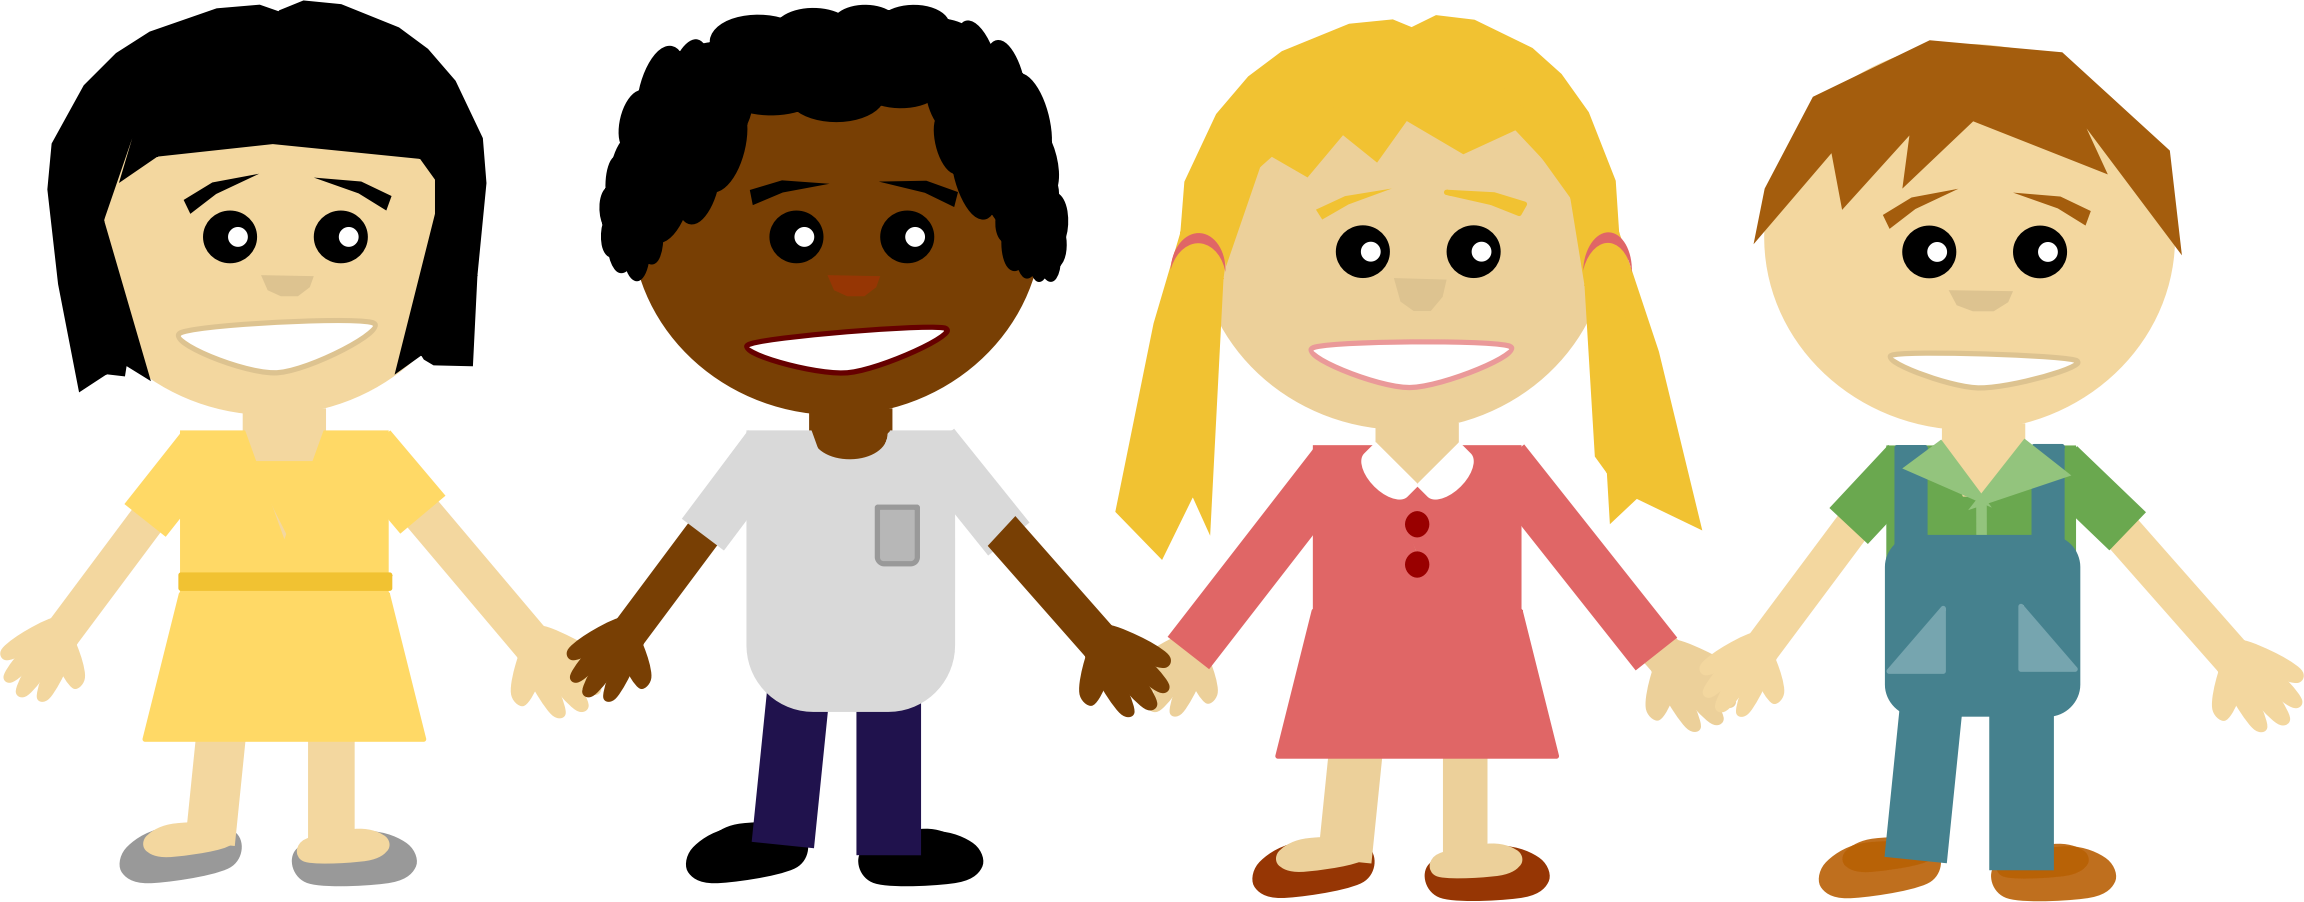 Holding Hands Clipart - Friends Holding Hands Clipart (2304x902)